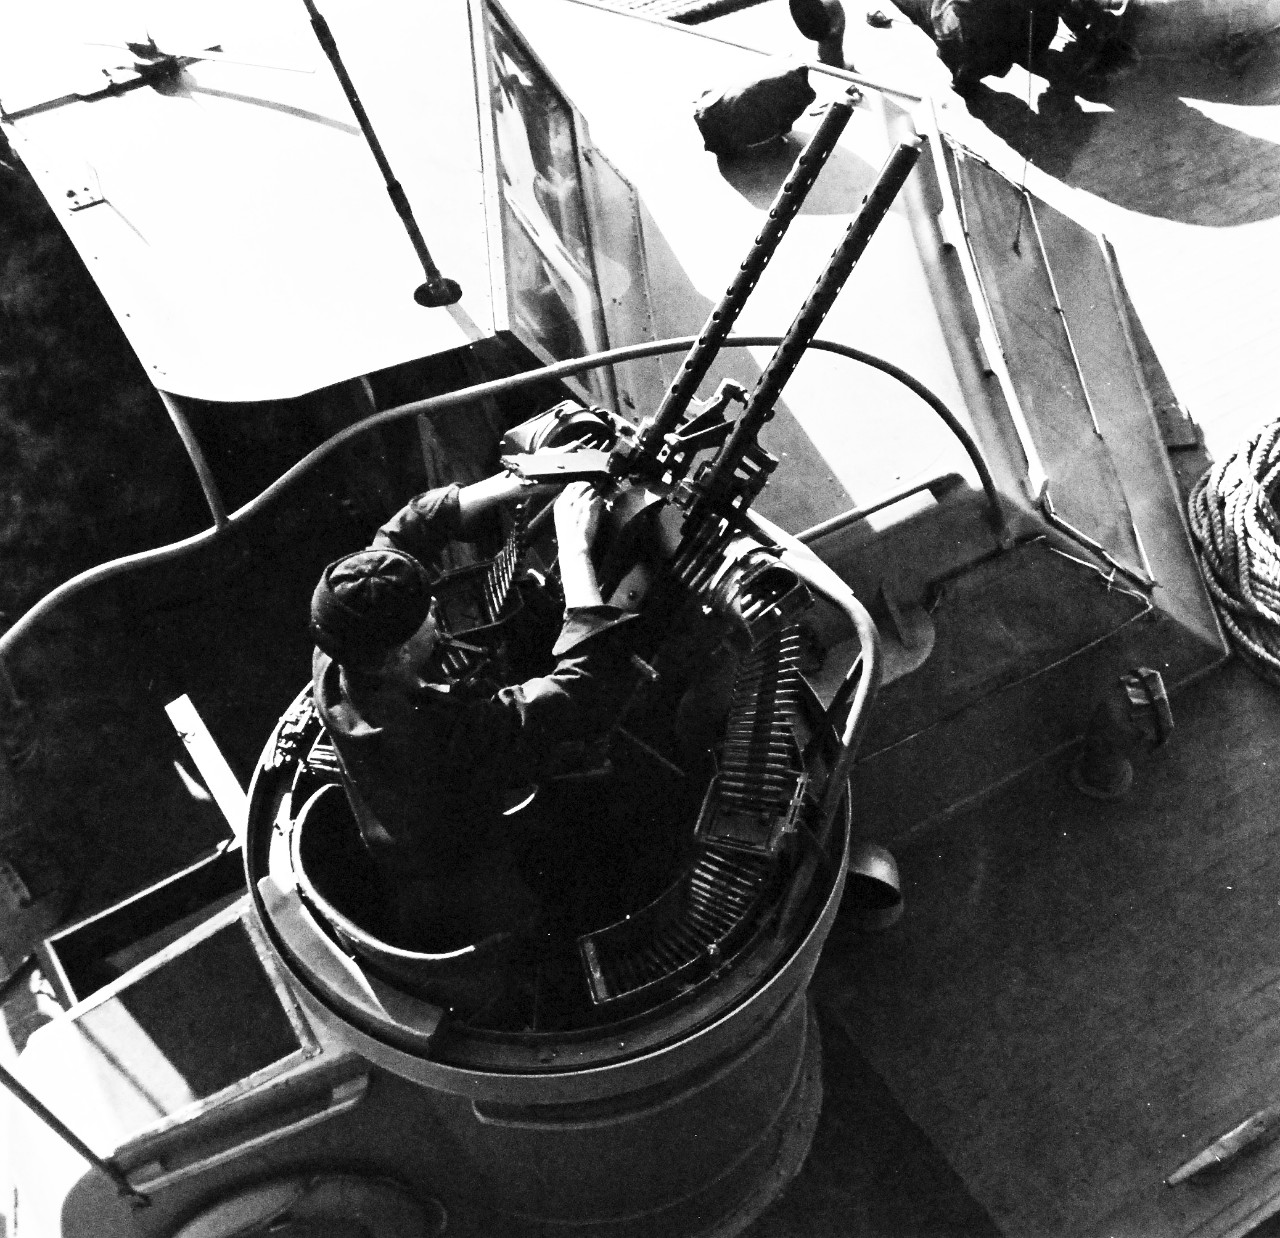 80-G-475658:  Aleutian Islands Campaign, June 1942 - August 1943.  Battle of Attu, May 11-29, 1943.  Gunner cleans 50 mm  gun aboard PT Boat at Attu base.   Photographed released by the Steichen Photographic Unit:  Lieutenant Commander Horace Bristol, July 1943.   TR-5334.    U.S. Navy photograph, now in the collections of the National Archives.  (2015/11/17).